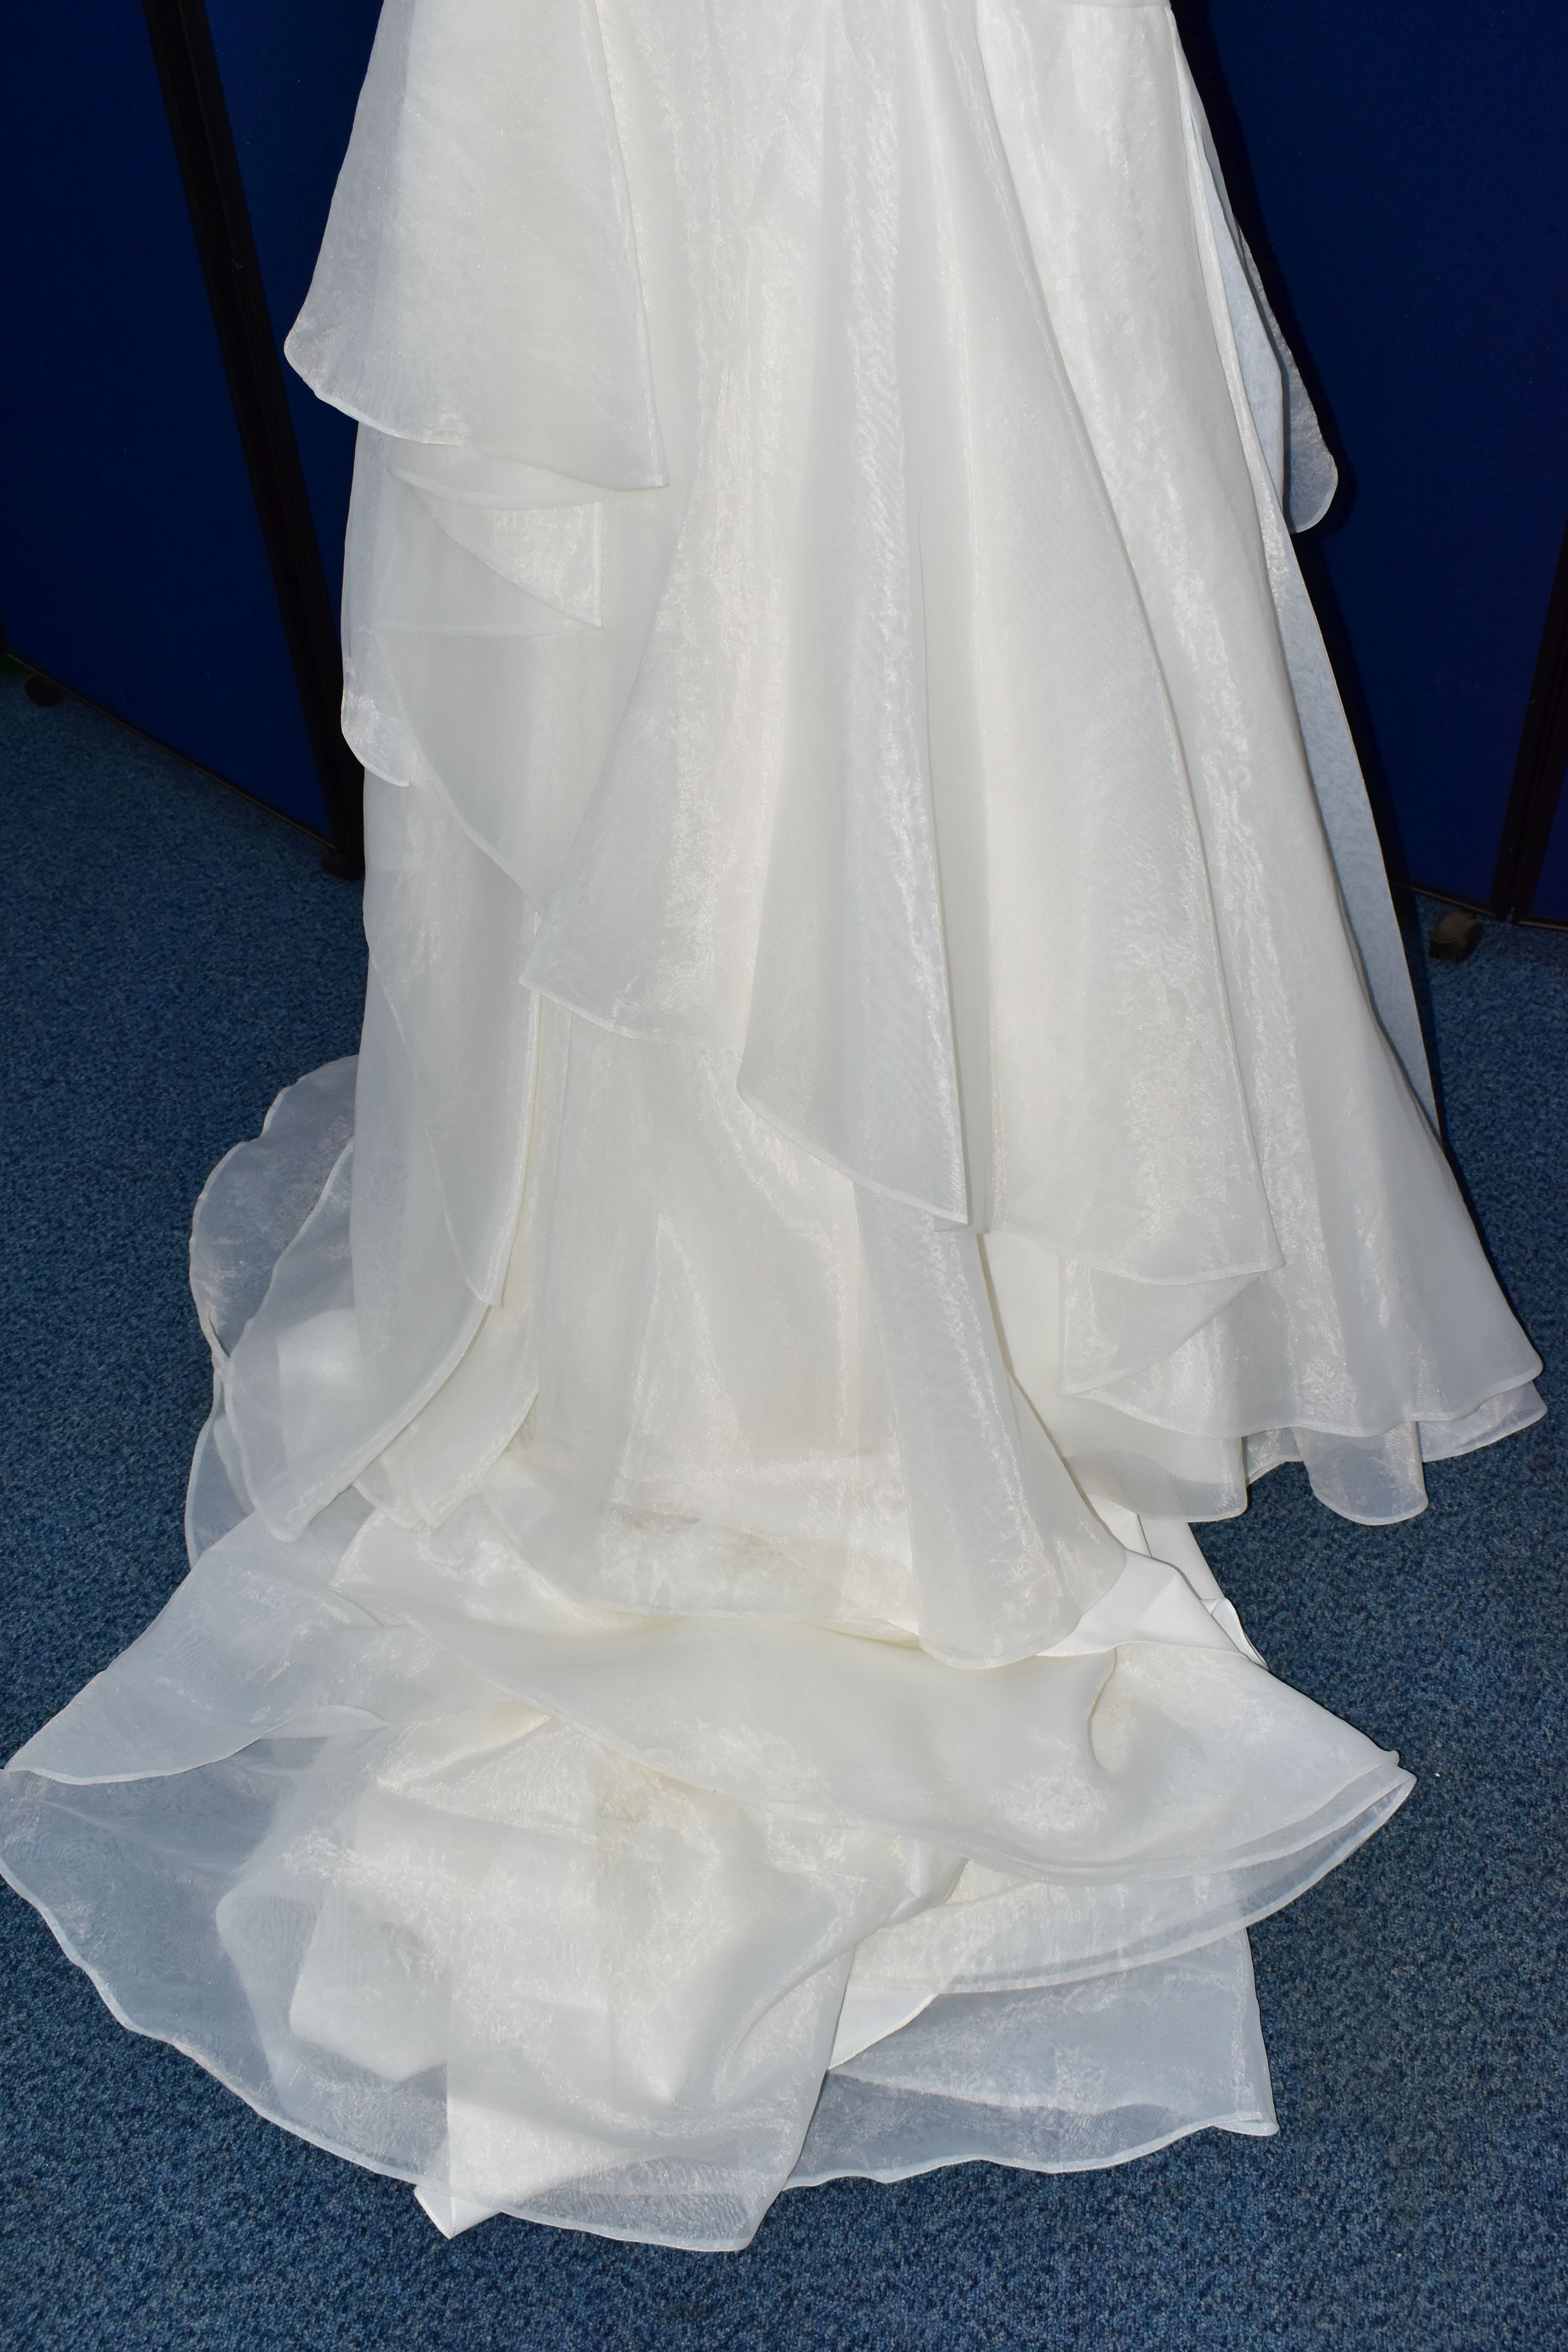 WEDDING DRESS, size 6, long train, pewter accent beaded appliques, strapping detail in the back, - Image 7 of 10